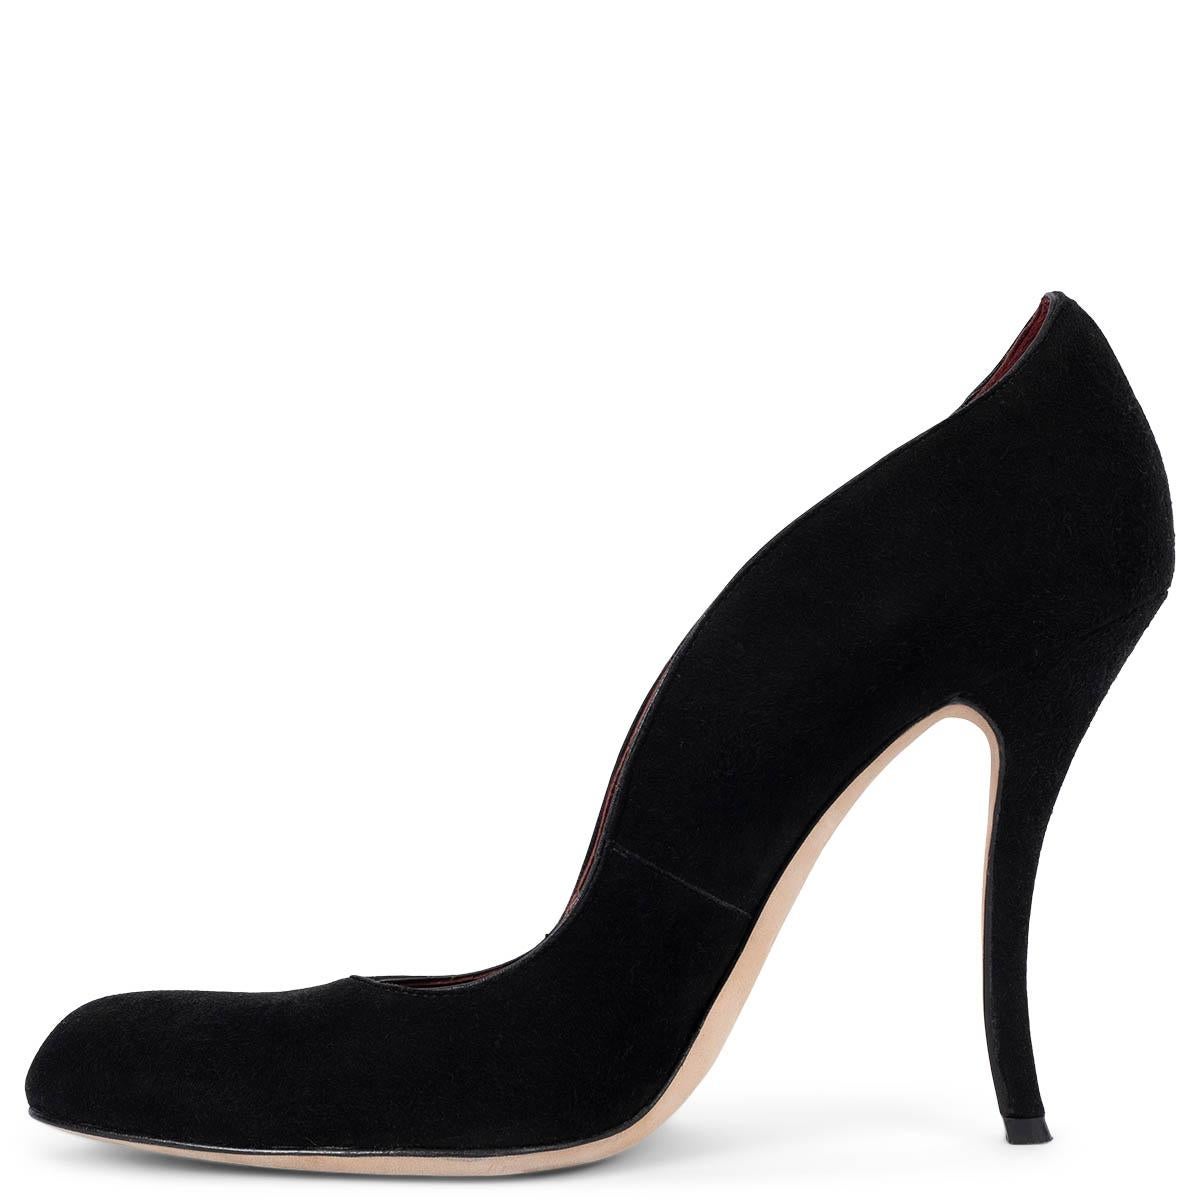 MANOLO BLAHNIK black suede CURVED HEEL Pumps Shoes 38 In Excellent Condition For Sale In Zürich, CH